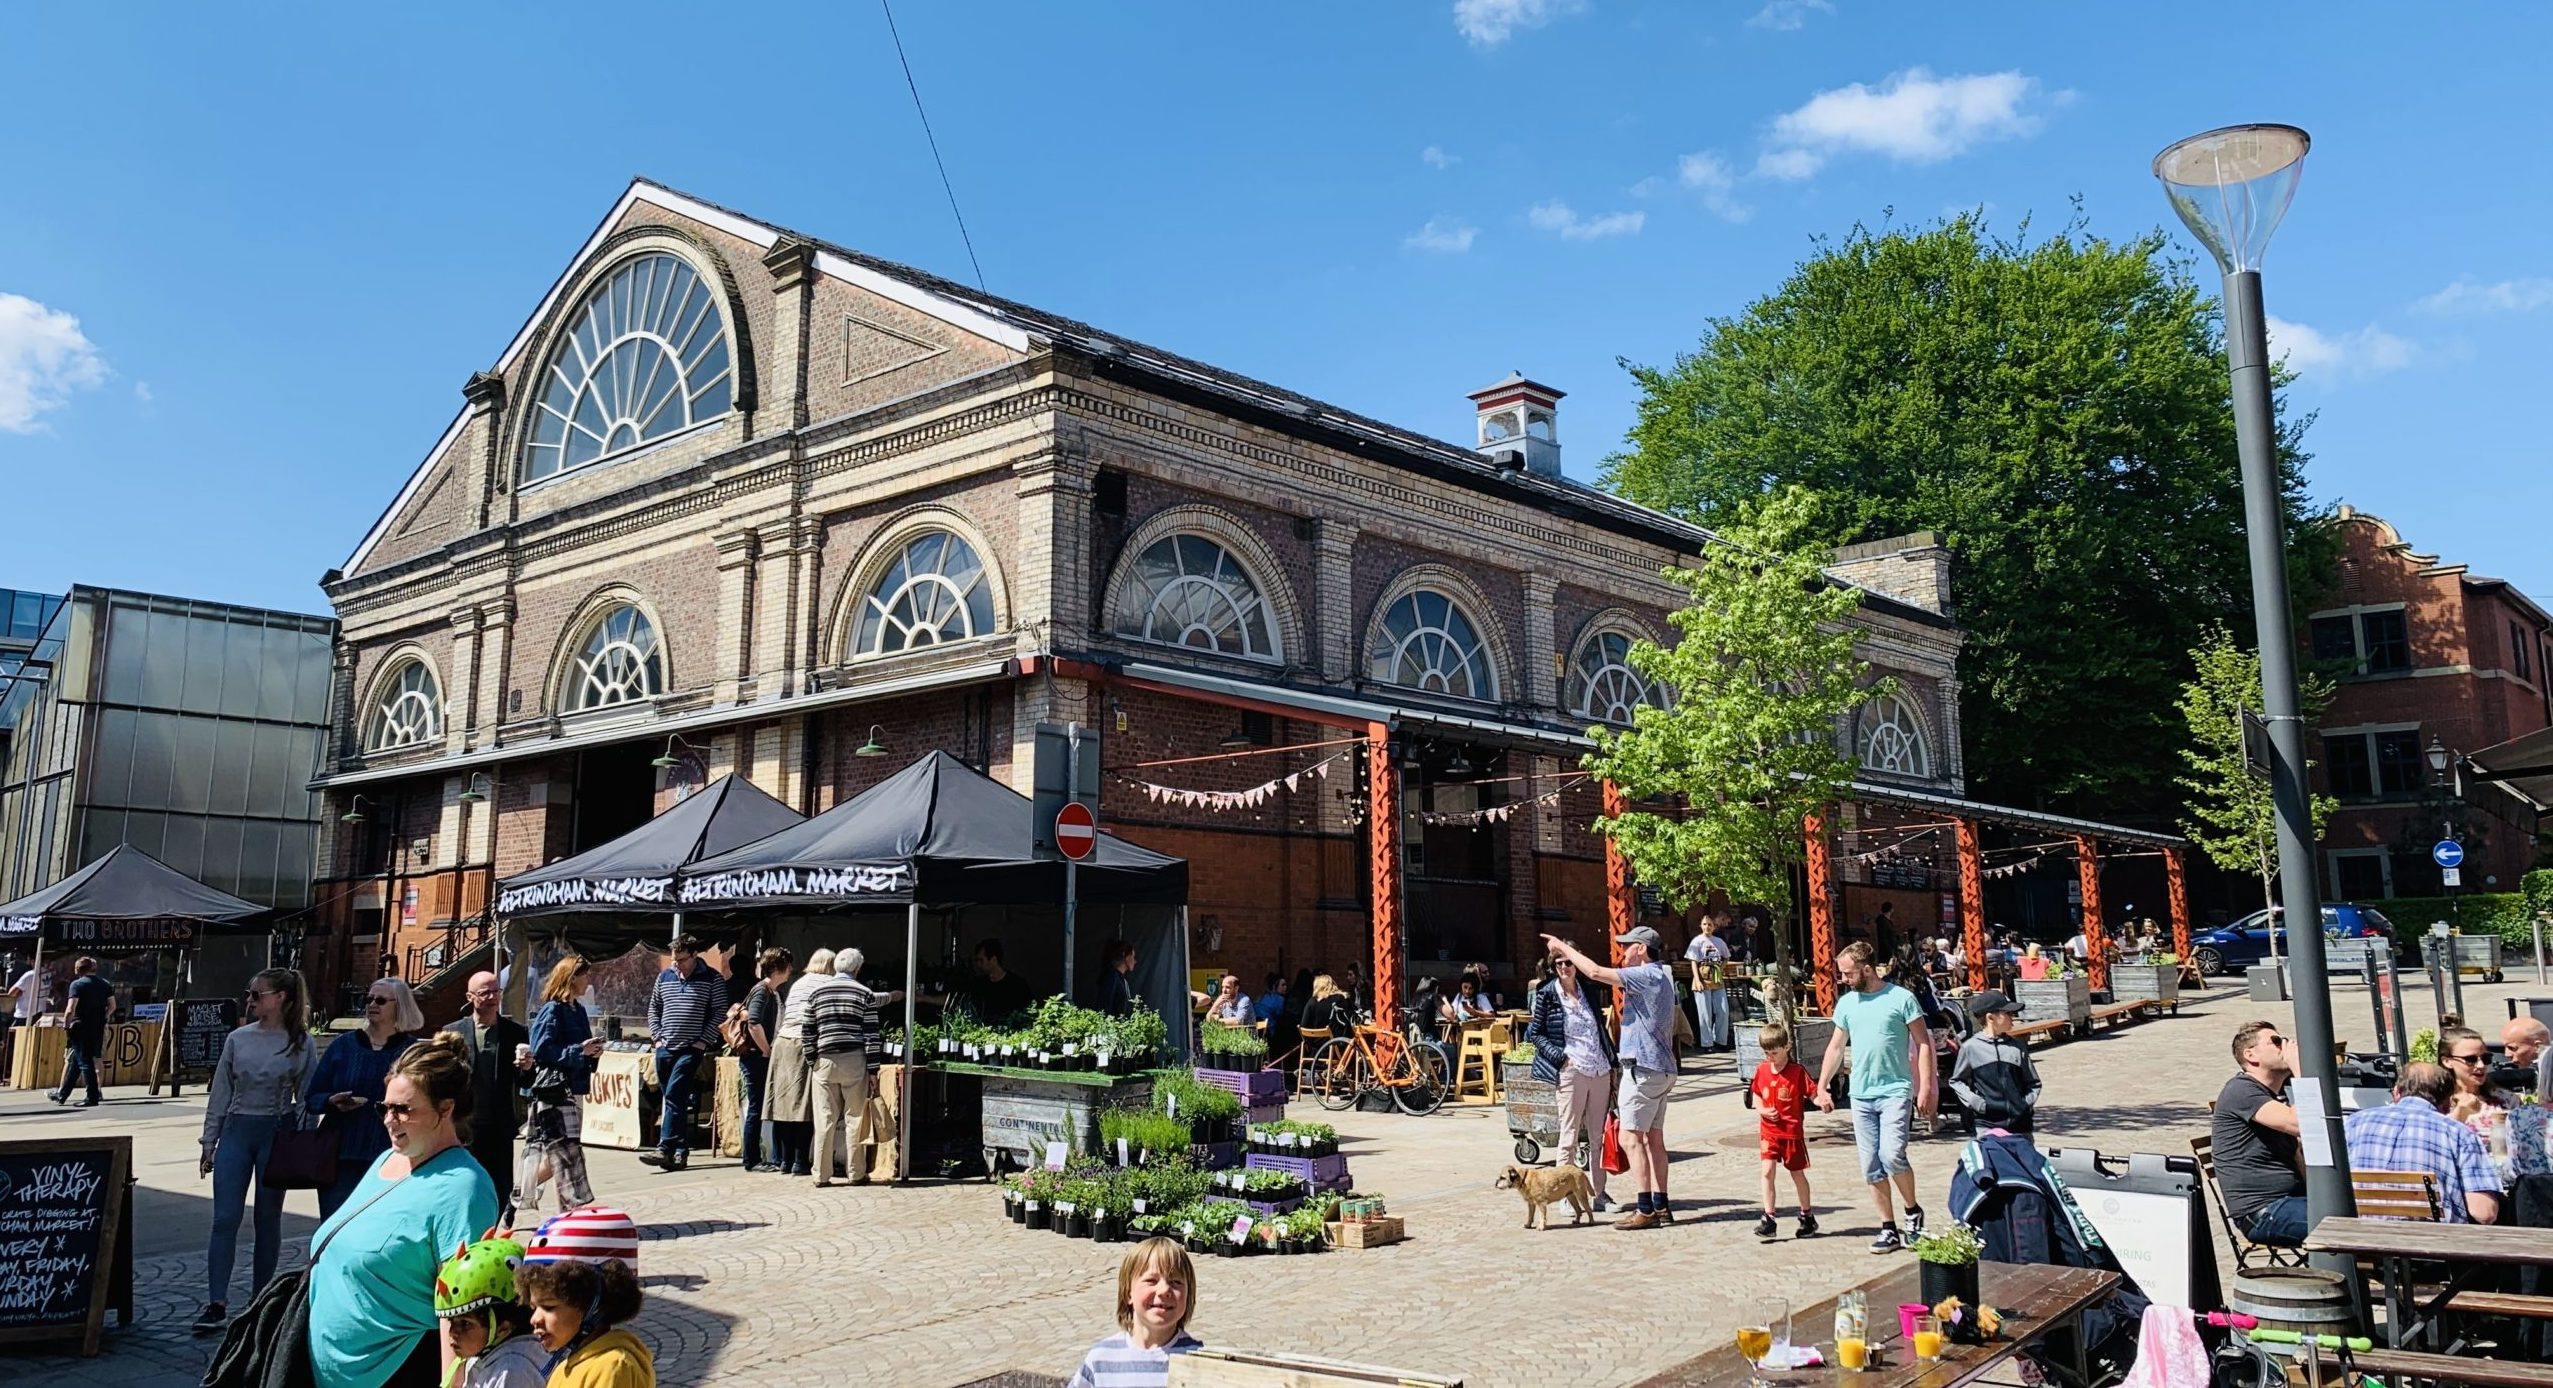 Historic market hall surrounded by covered shops and shoppers in the sun.